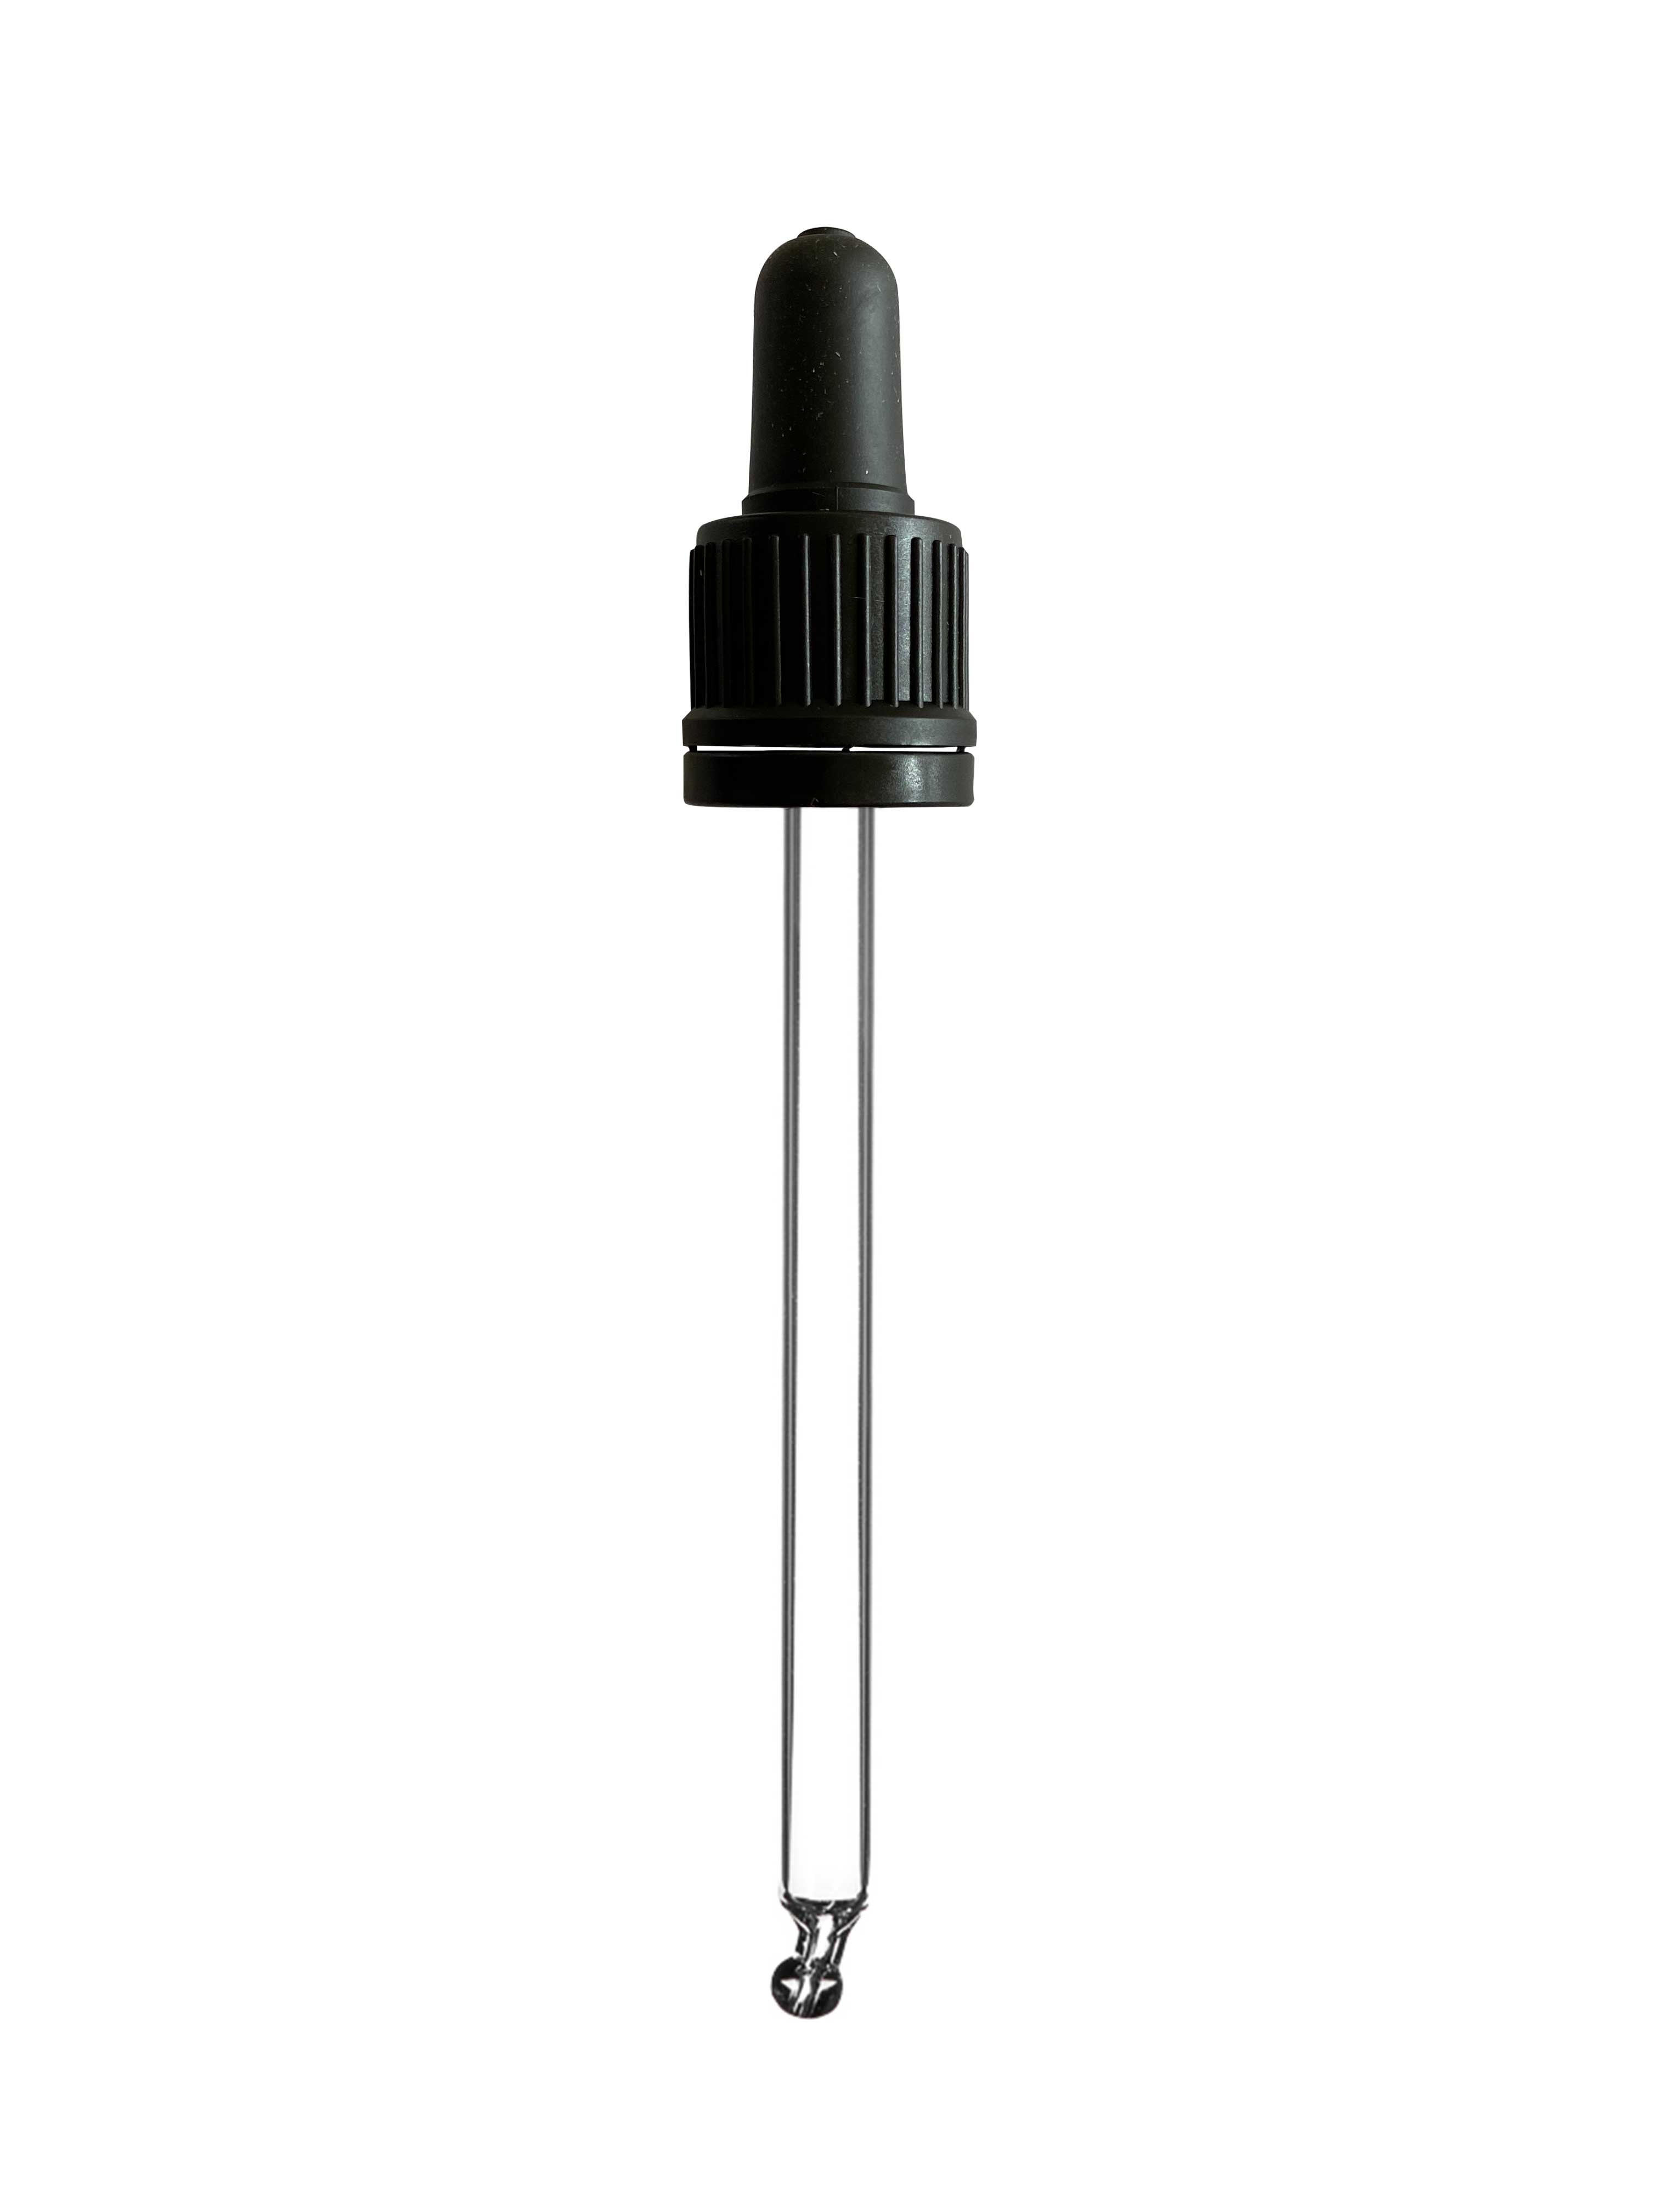 Pipette series II, DIN18, tamper-evident, PP, black, ribbed, black bulb TPE 0.7 ml, bent ball tip with 1.0 opening for Ginger 100 ml